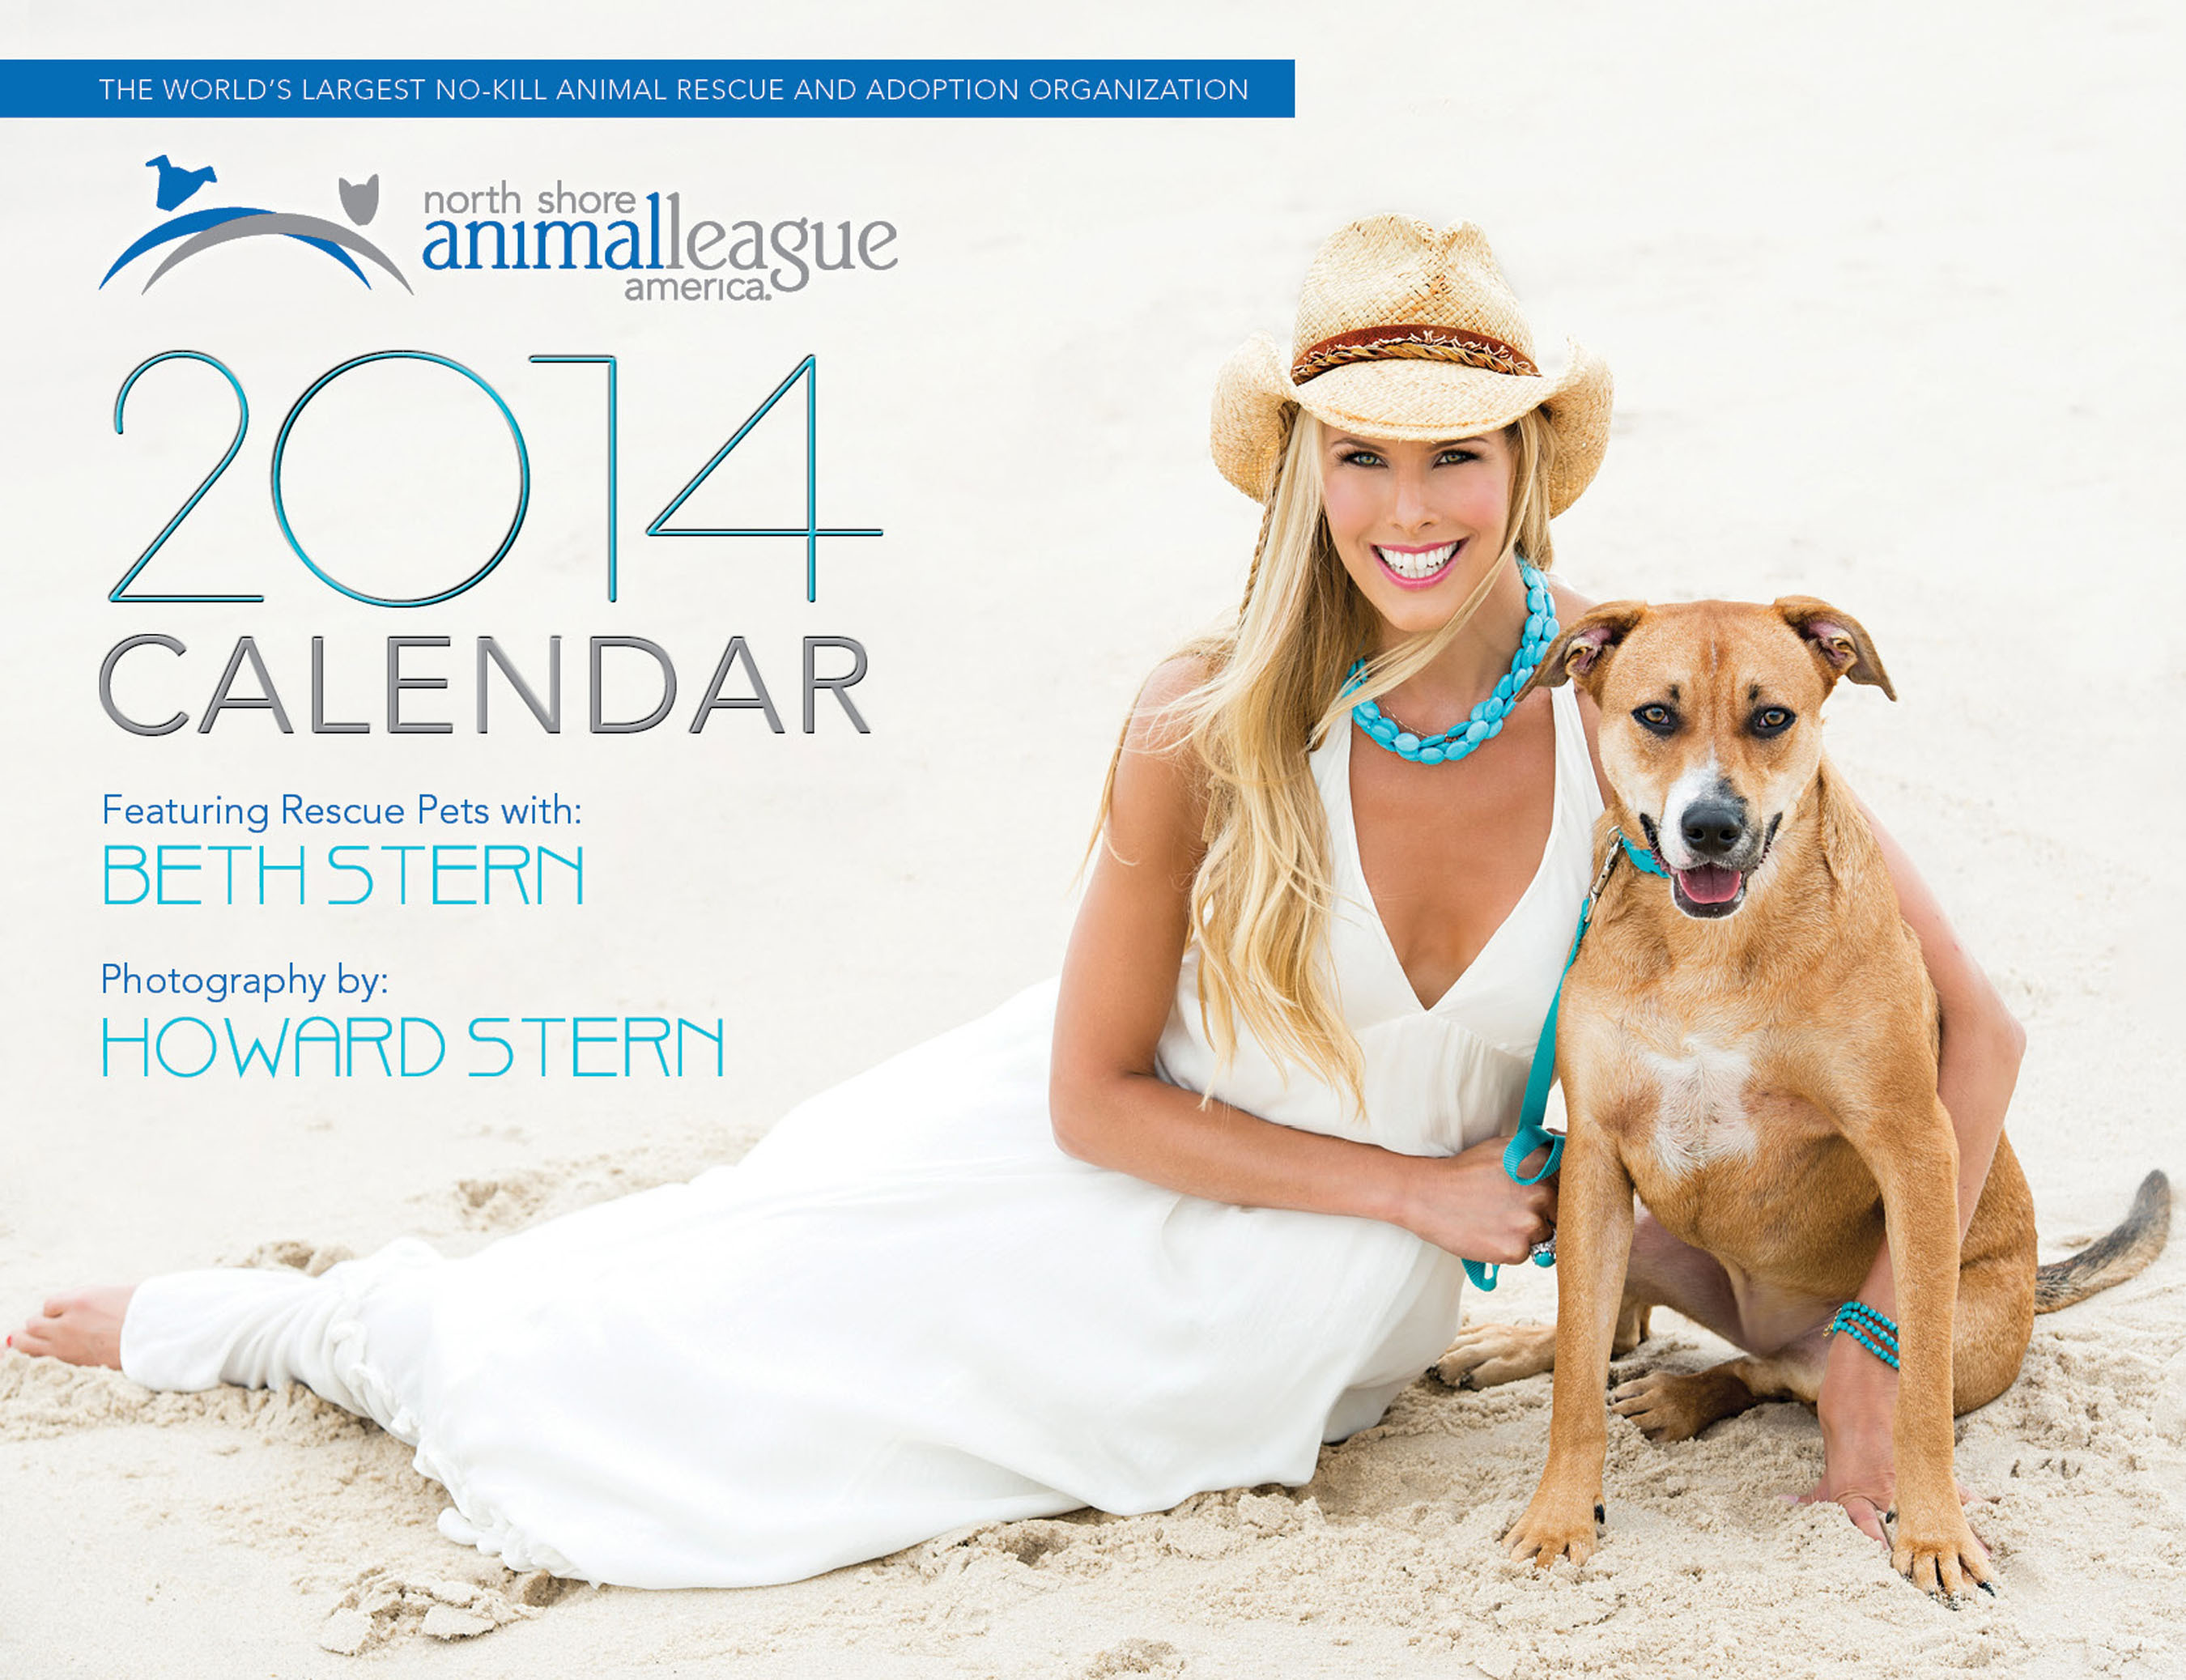 Animal Advocates And Adopters Beth And Howard Stern Resolve To Help Save Animals Lives In 2014 With Commemorative Calendar In Support Of Expanding North Shore Animal League America S No Kill Mission